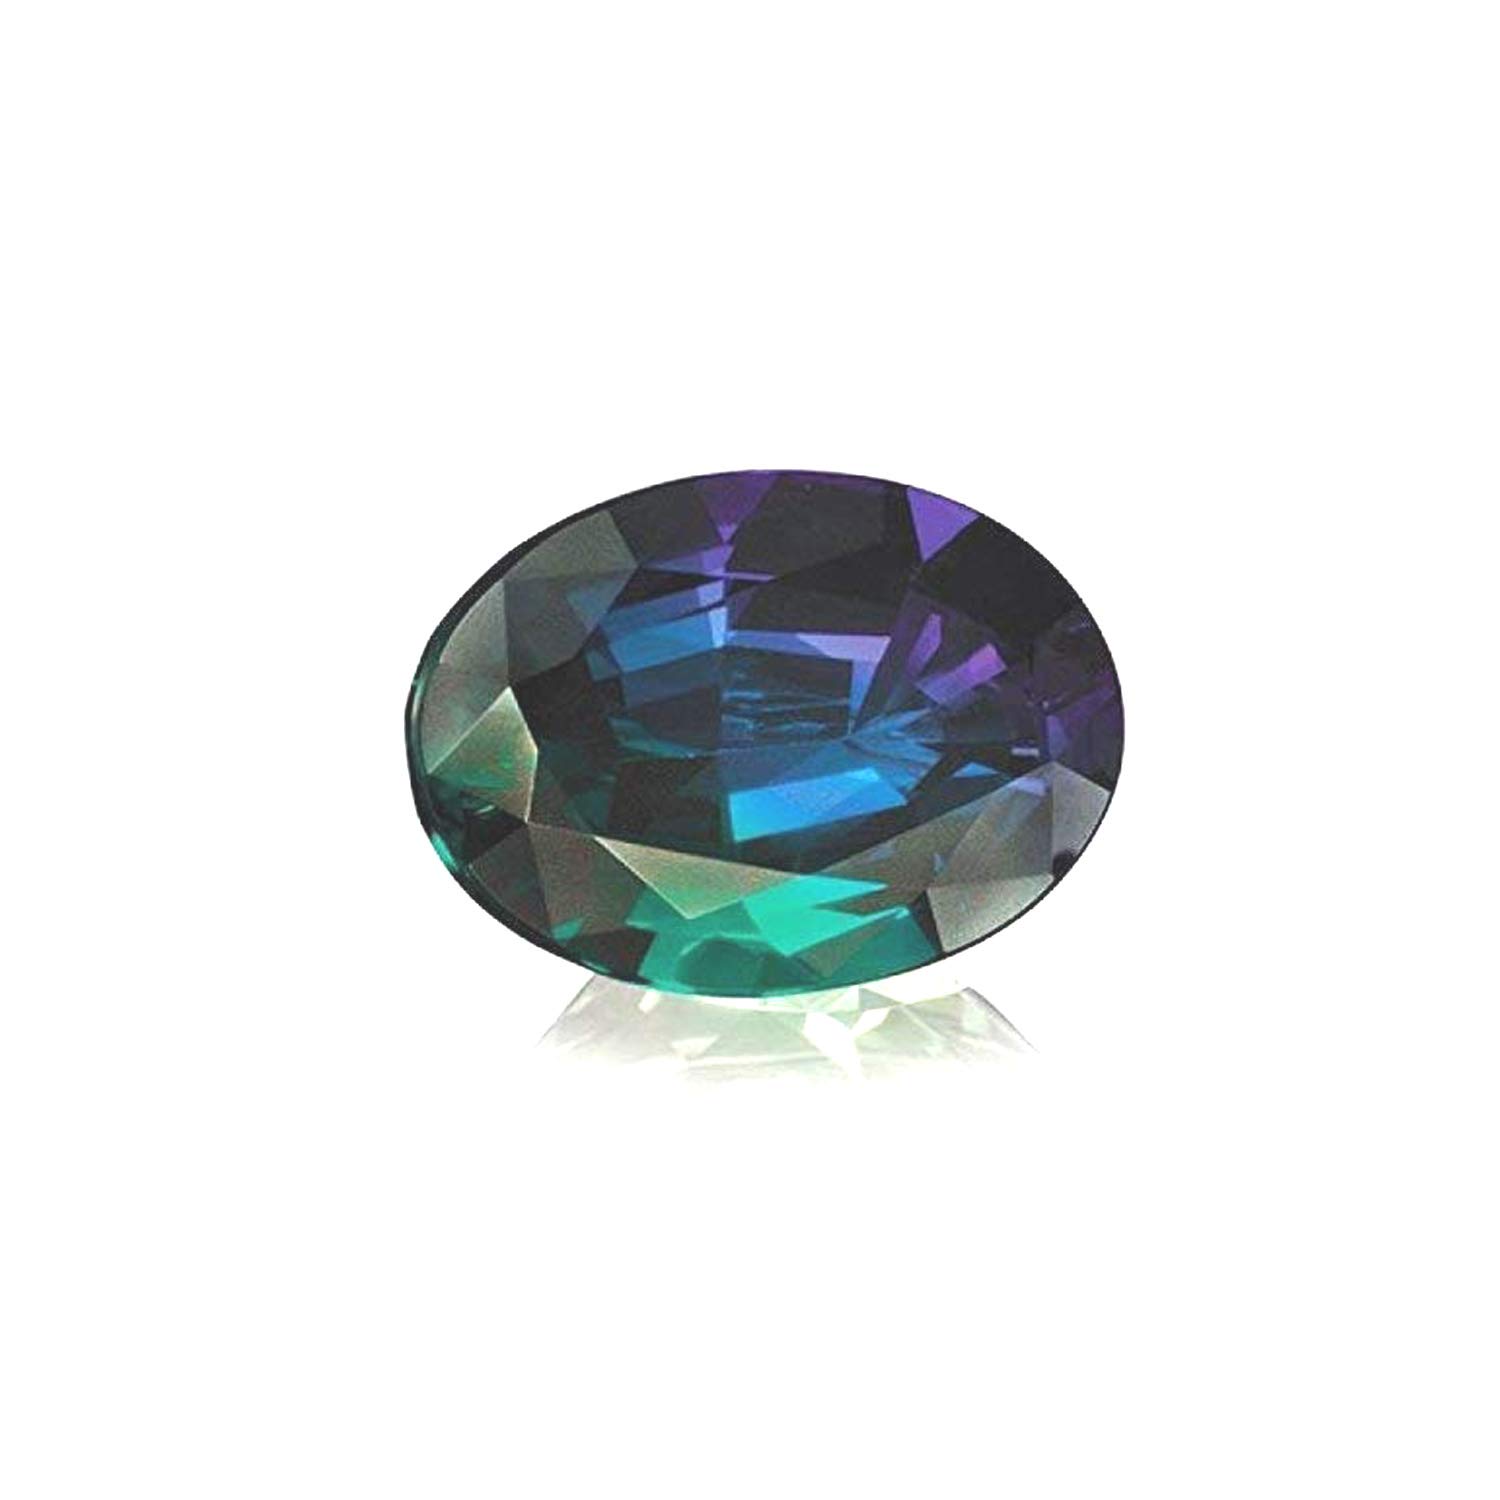 5 Interesting Facts About Alexandrite Gemstone That You Should Know